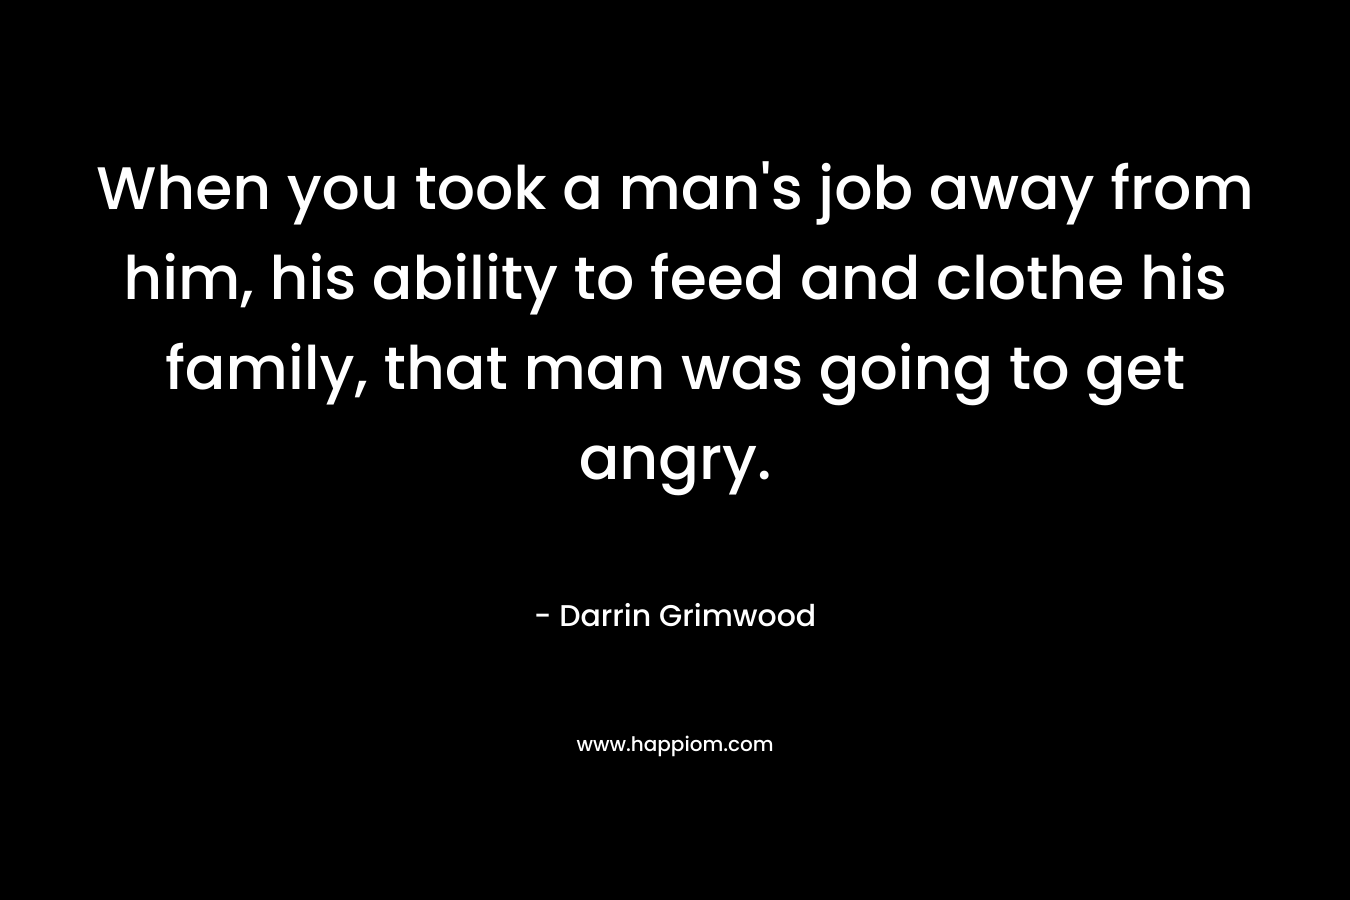 When you took a man's job away from him, his ability to feed and clothe his family, that man was going to get angry.